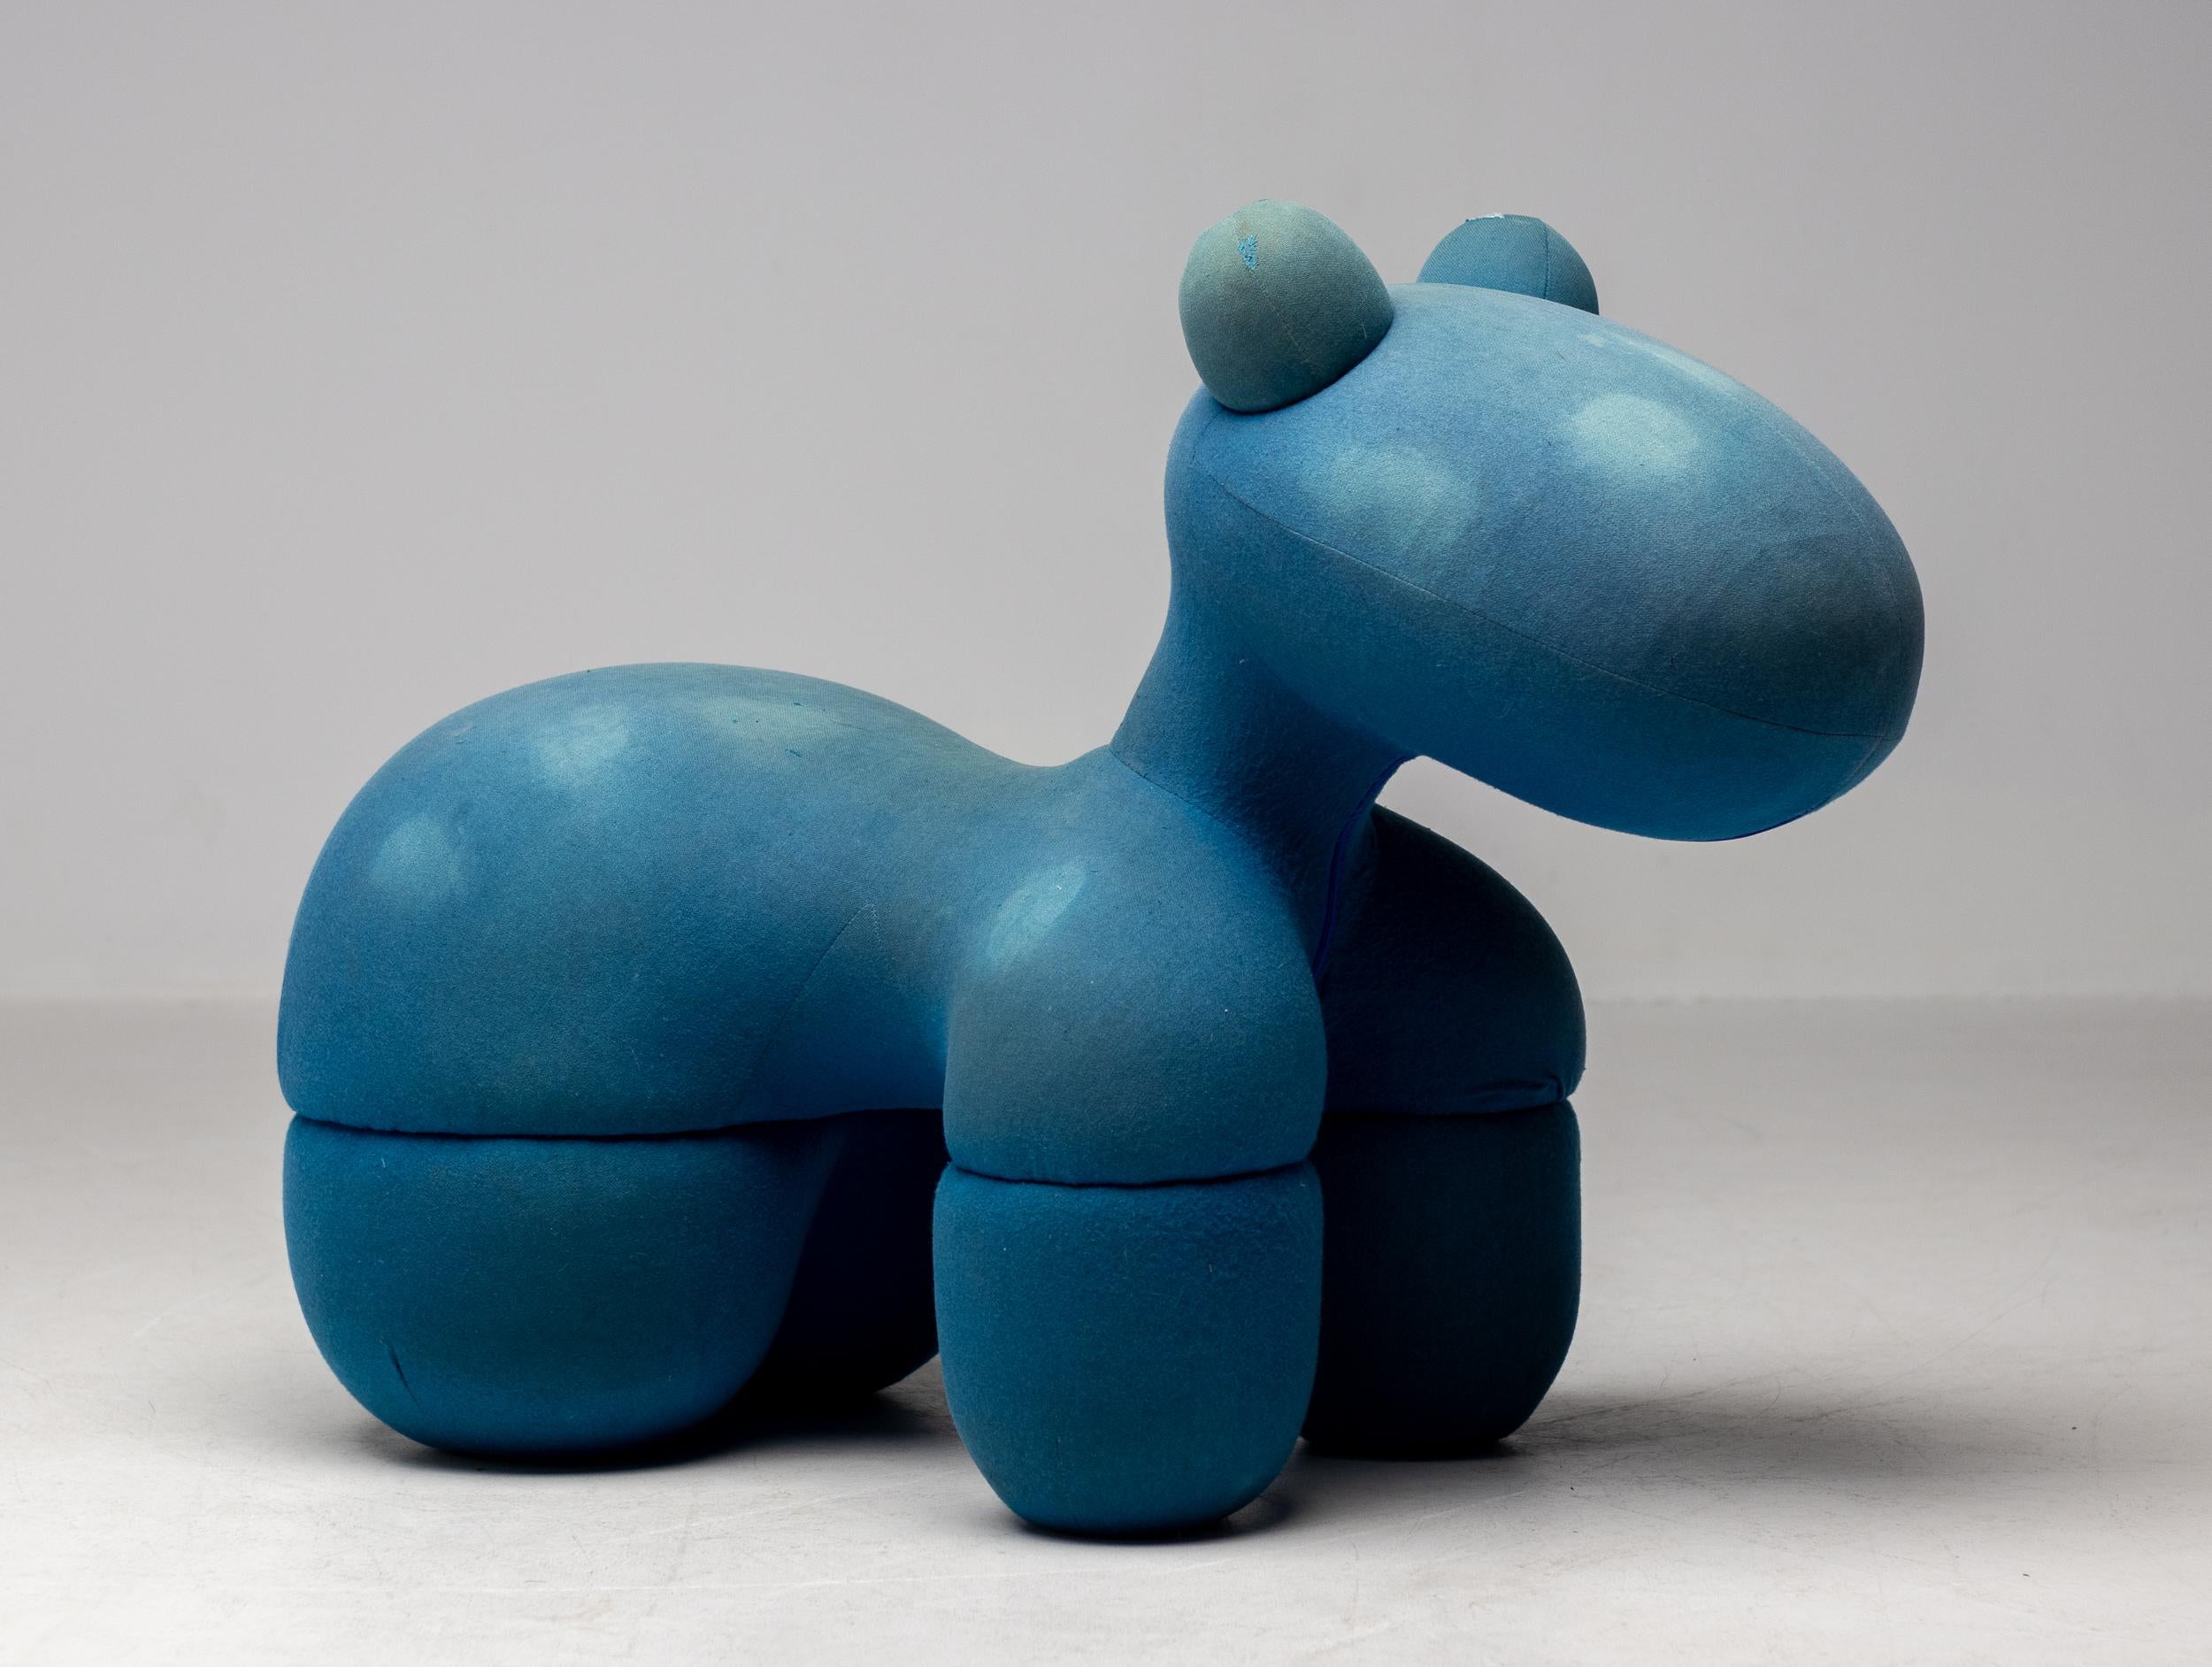 Rare, playful and iconic Pony Chair by designer Eero Aarnio in original blue fabric. The Pony Chair was designed by the Finnish designer in 1973 and has been a staple of contemporary design ever since. Internal steel frame. Extremely sturdy object.